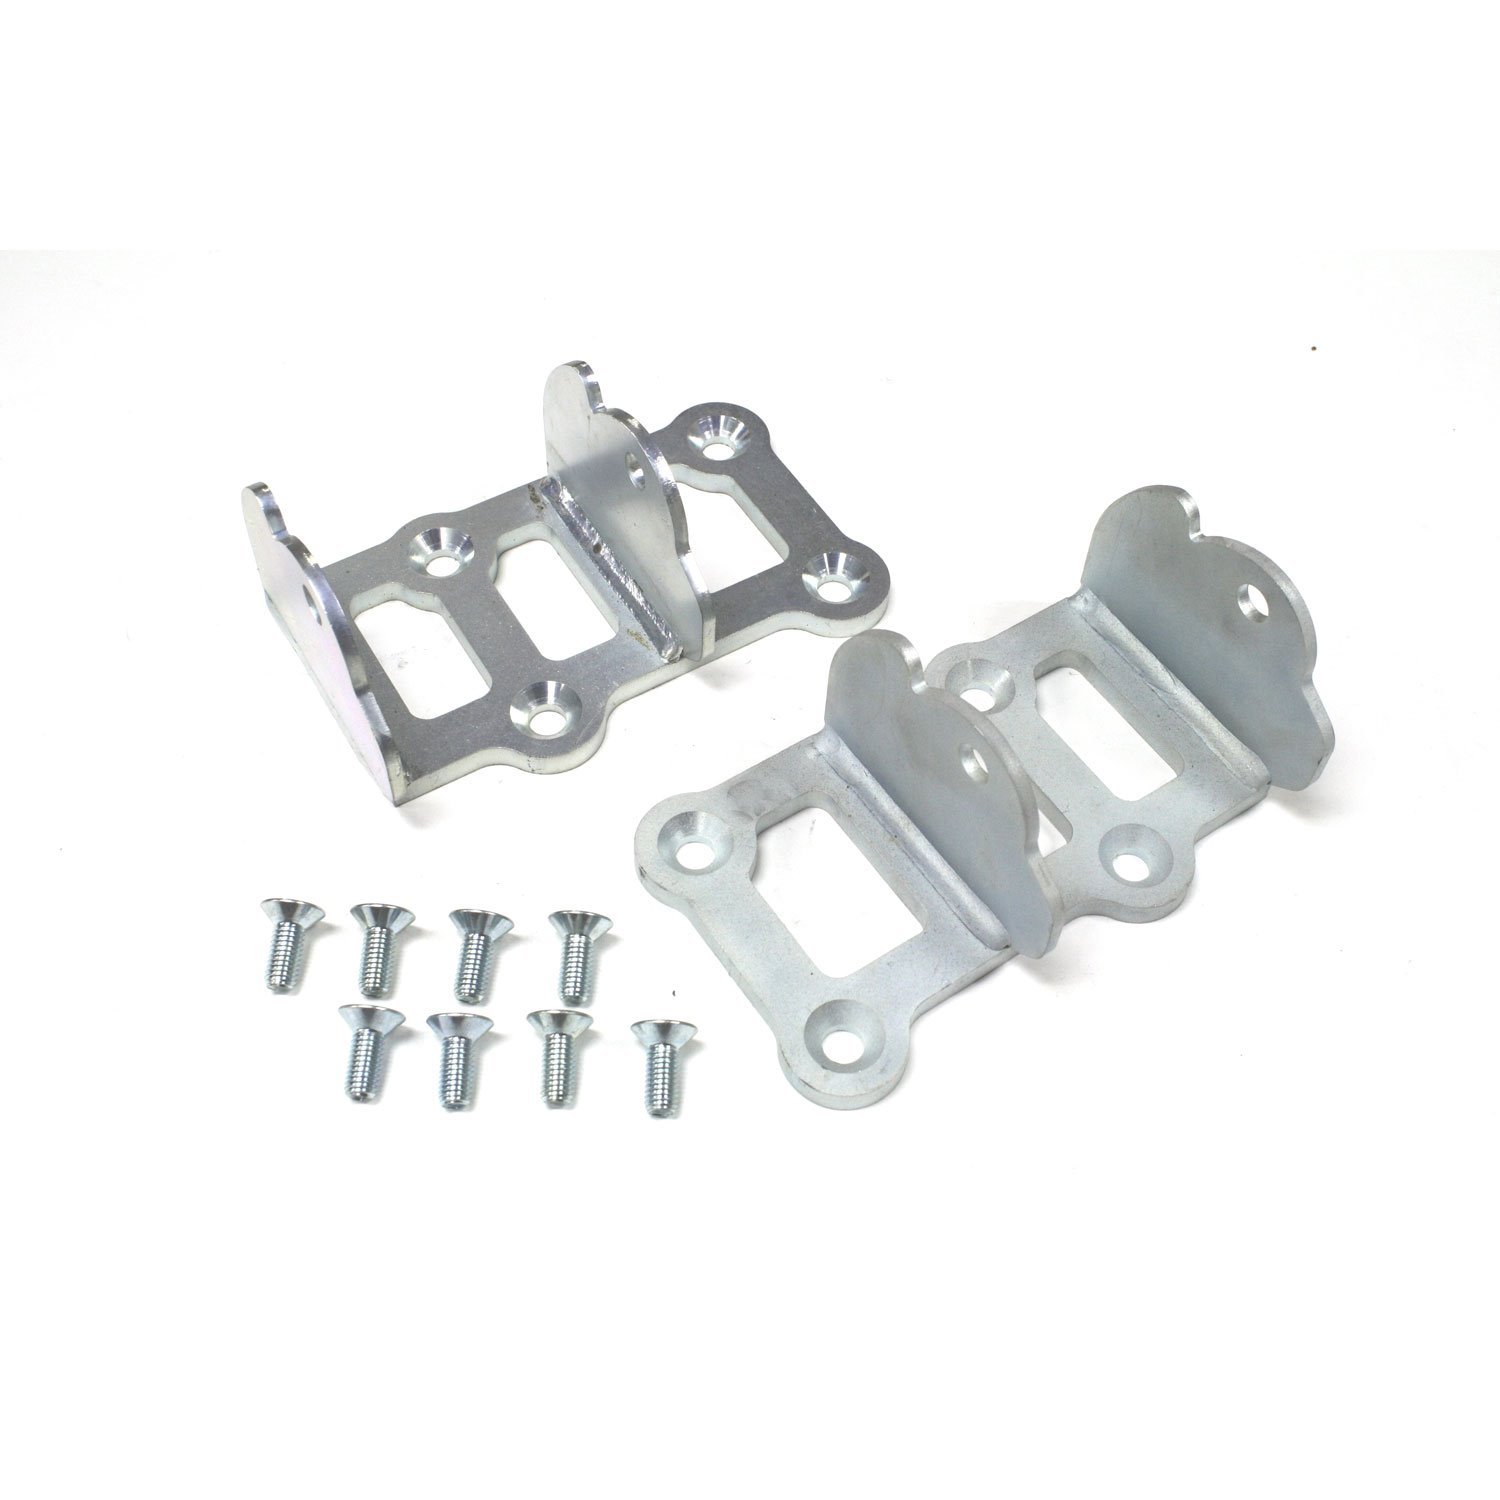 Motor Mount Adapter Plate Kit GM LS1/LS6 Into